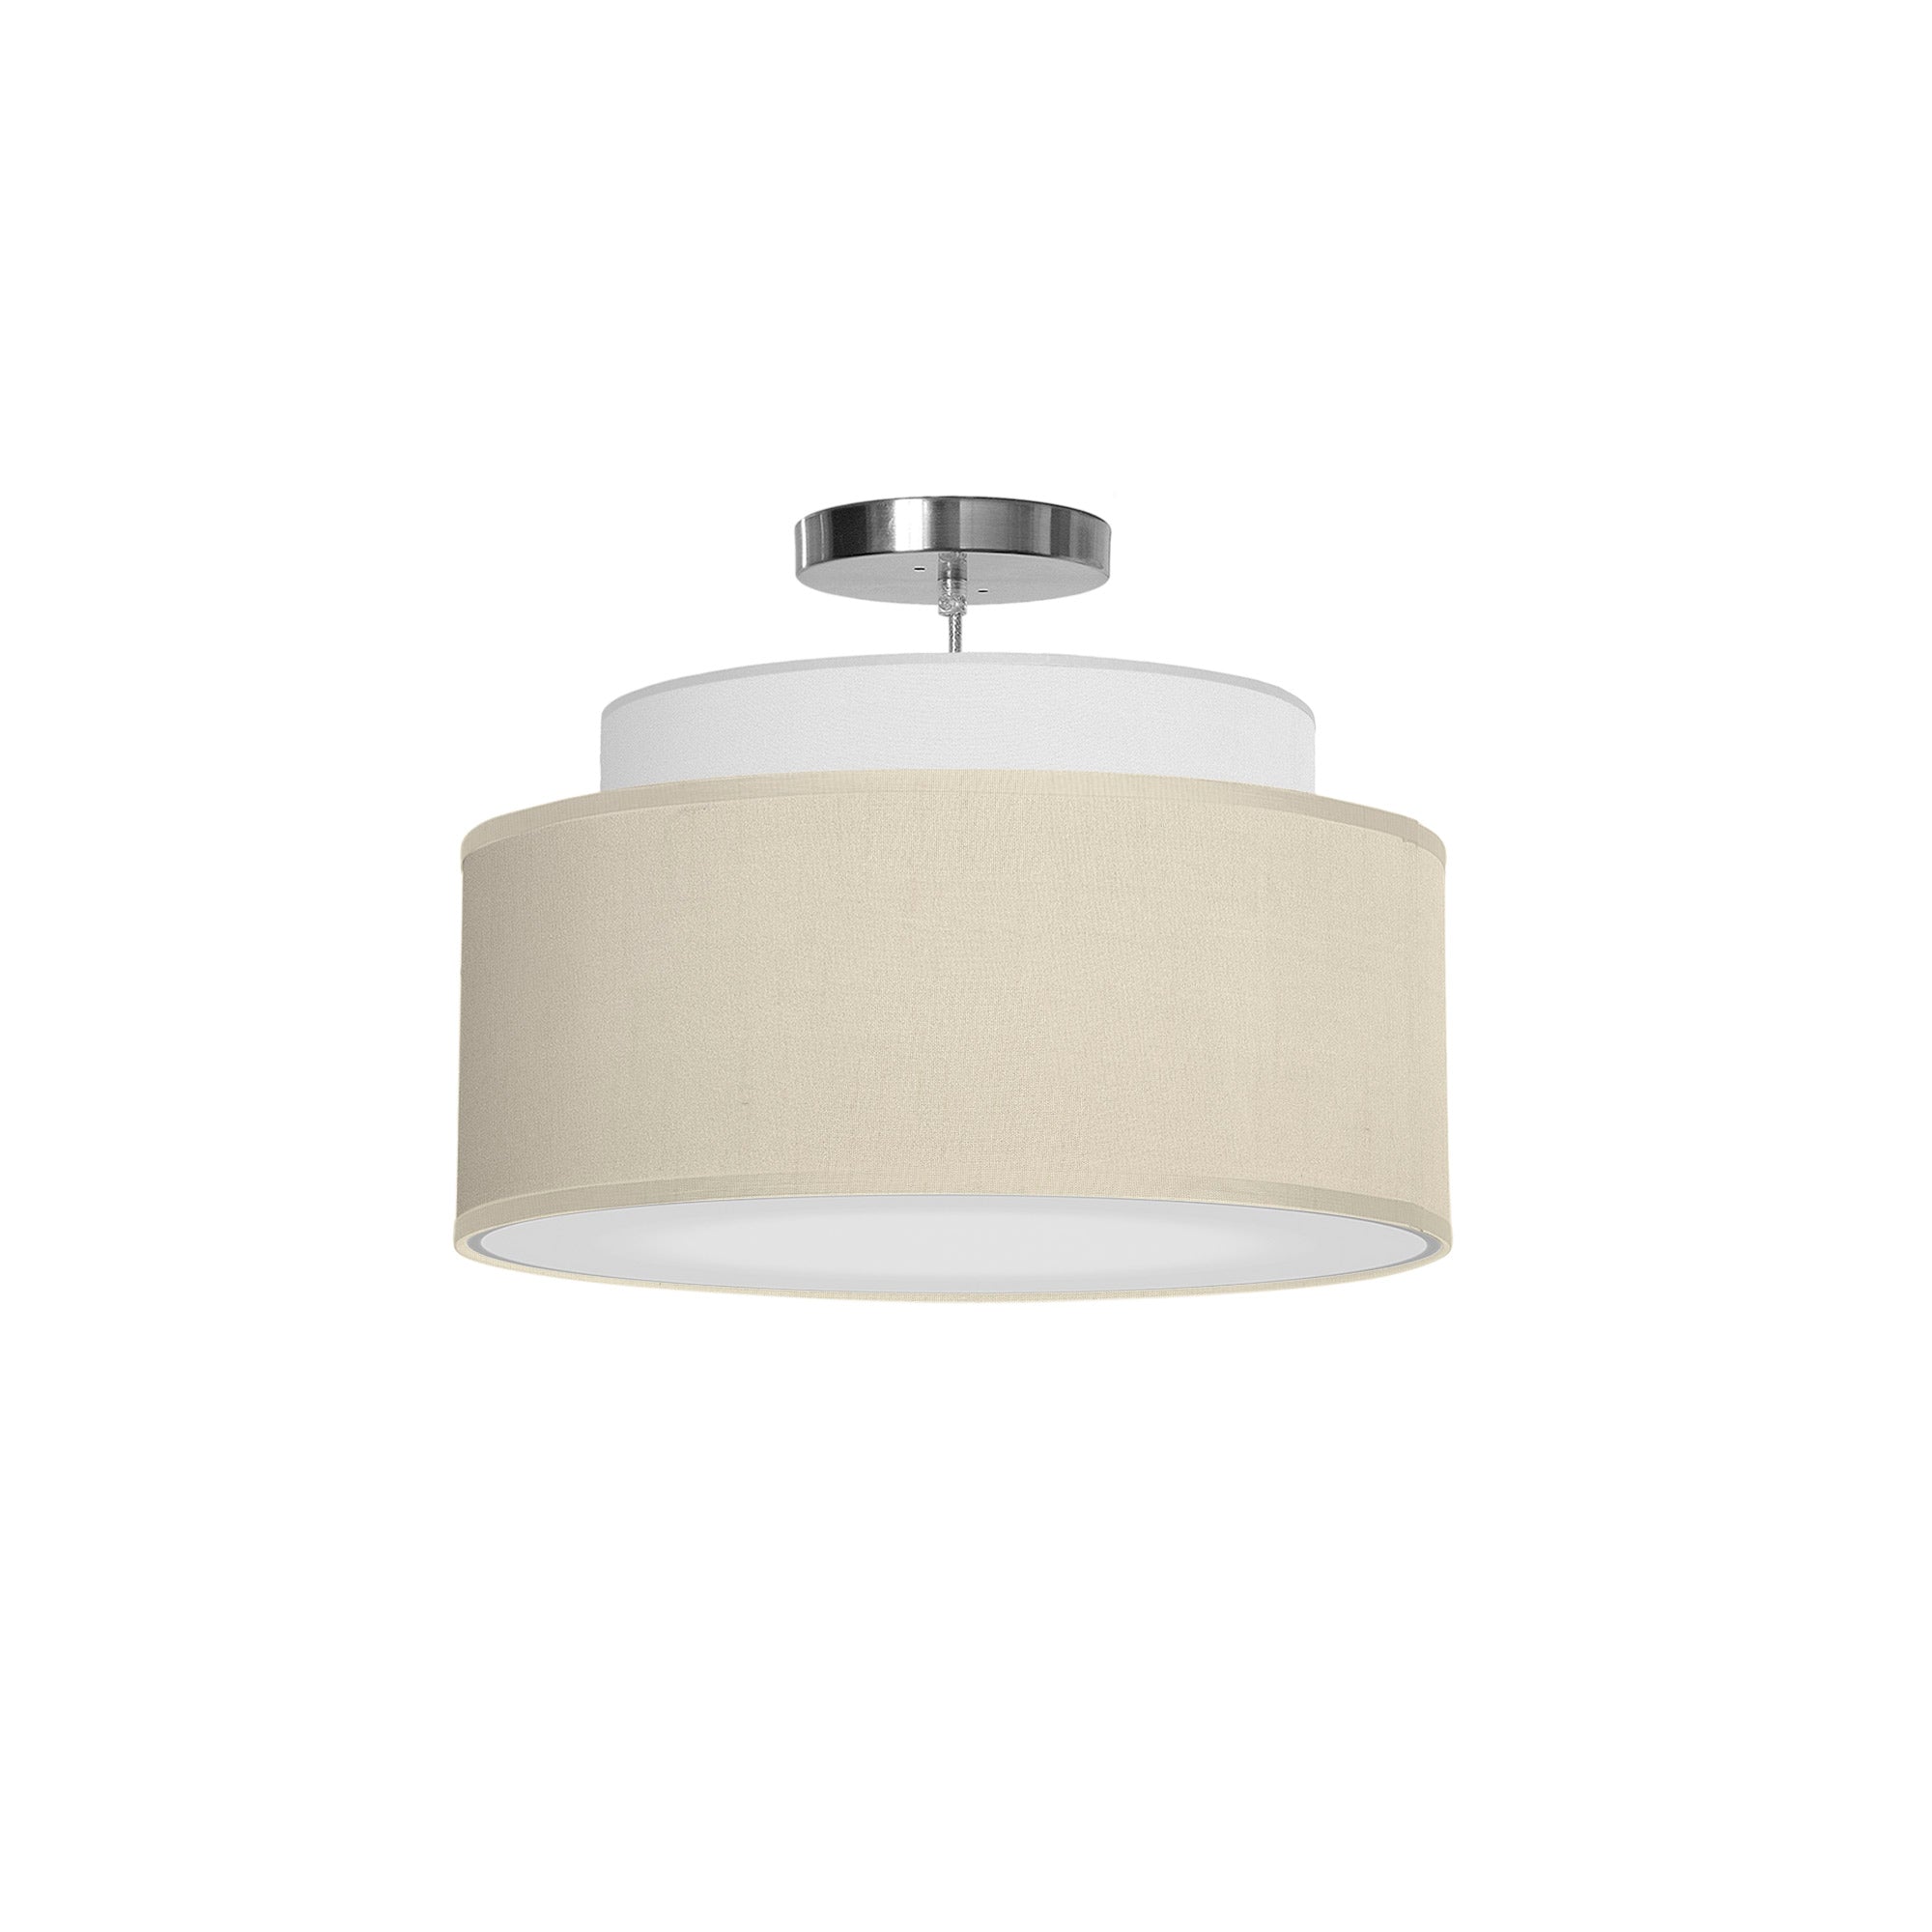 The Elsa Hanging Lamp from Seascape Fixtures with a silk shade in cream color.